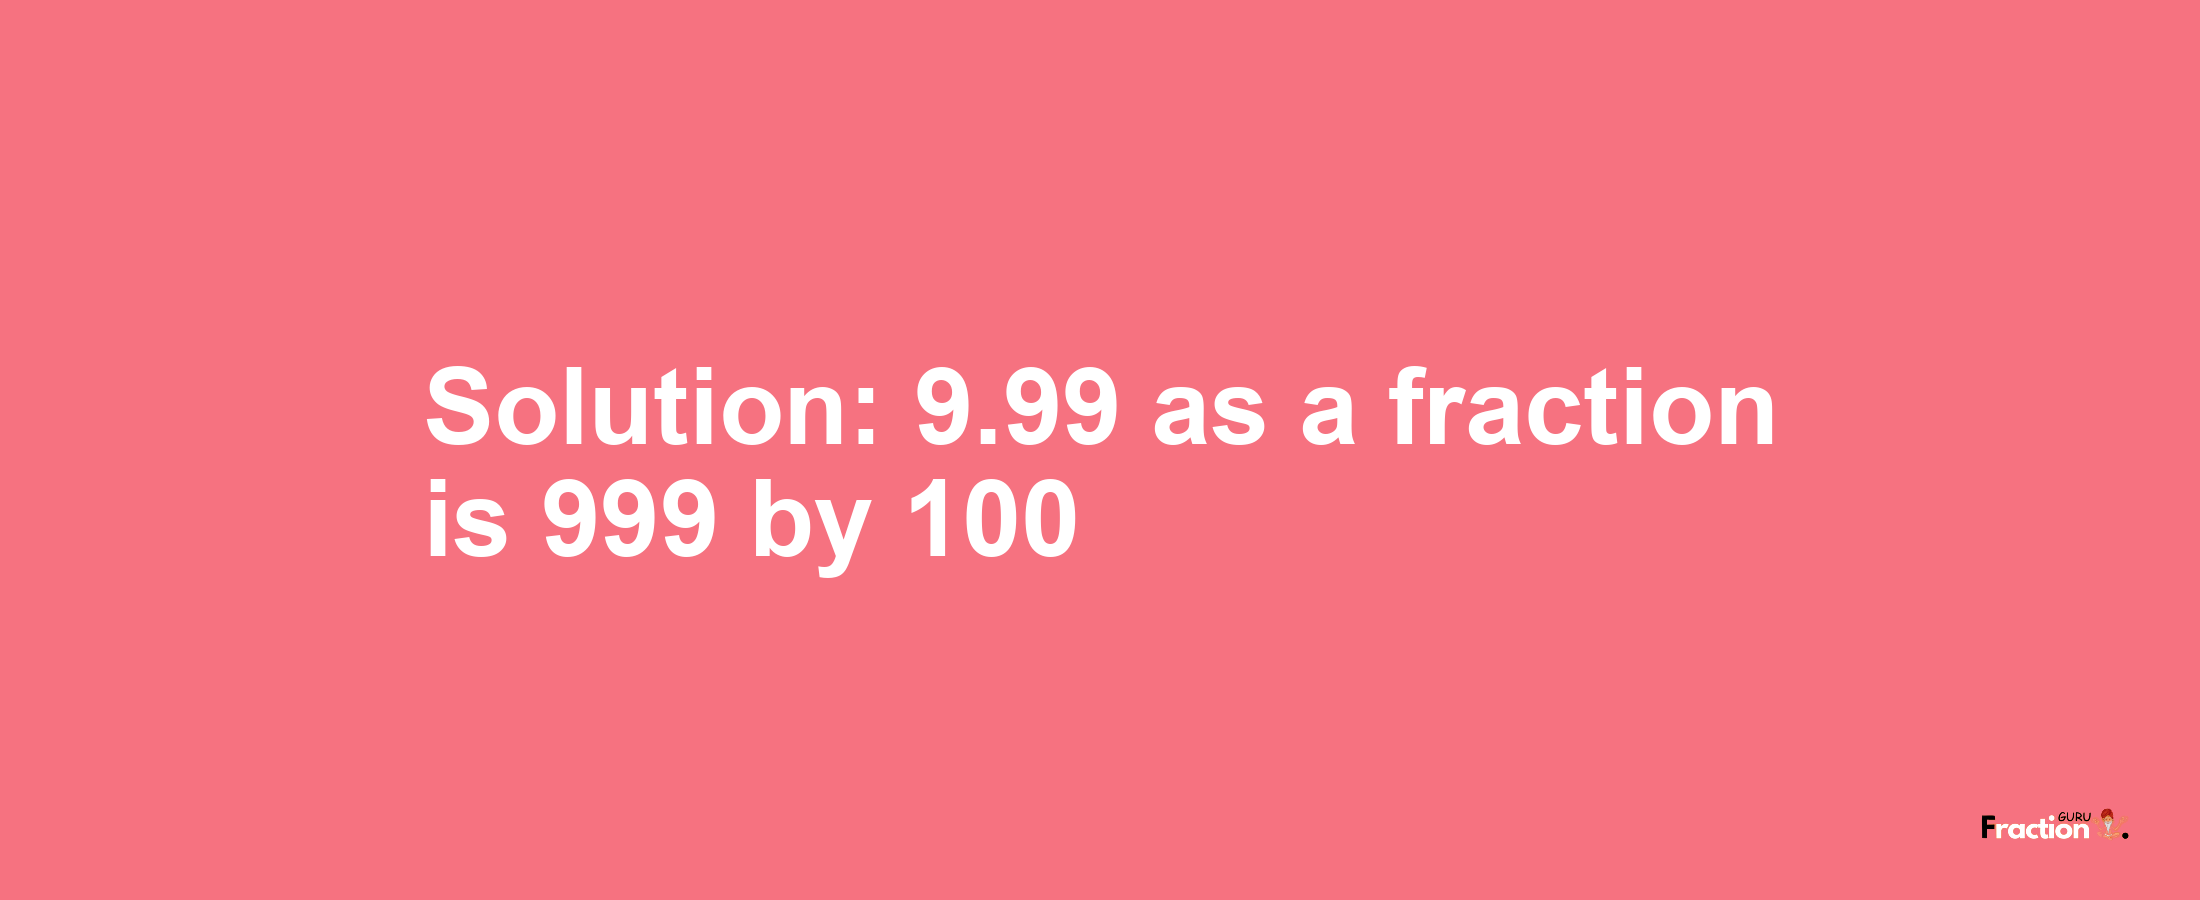 Solution:9.99 as a fraction is 999/100